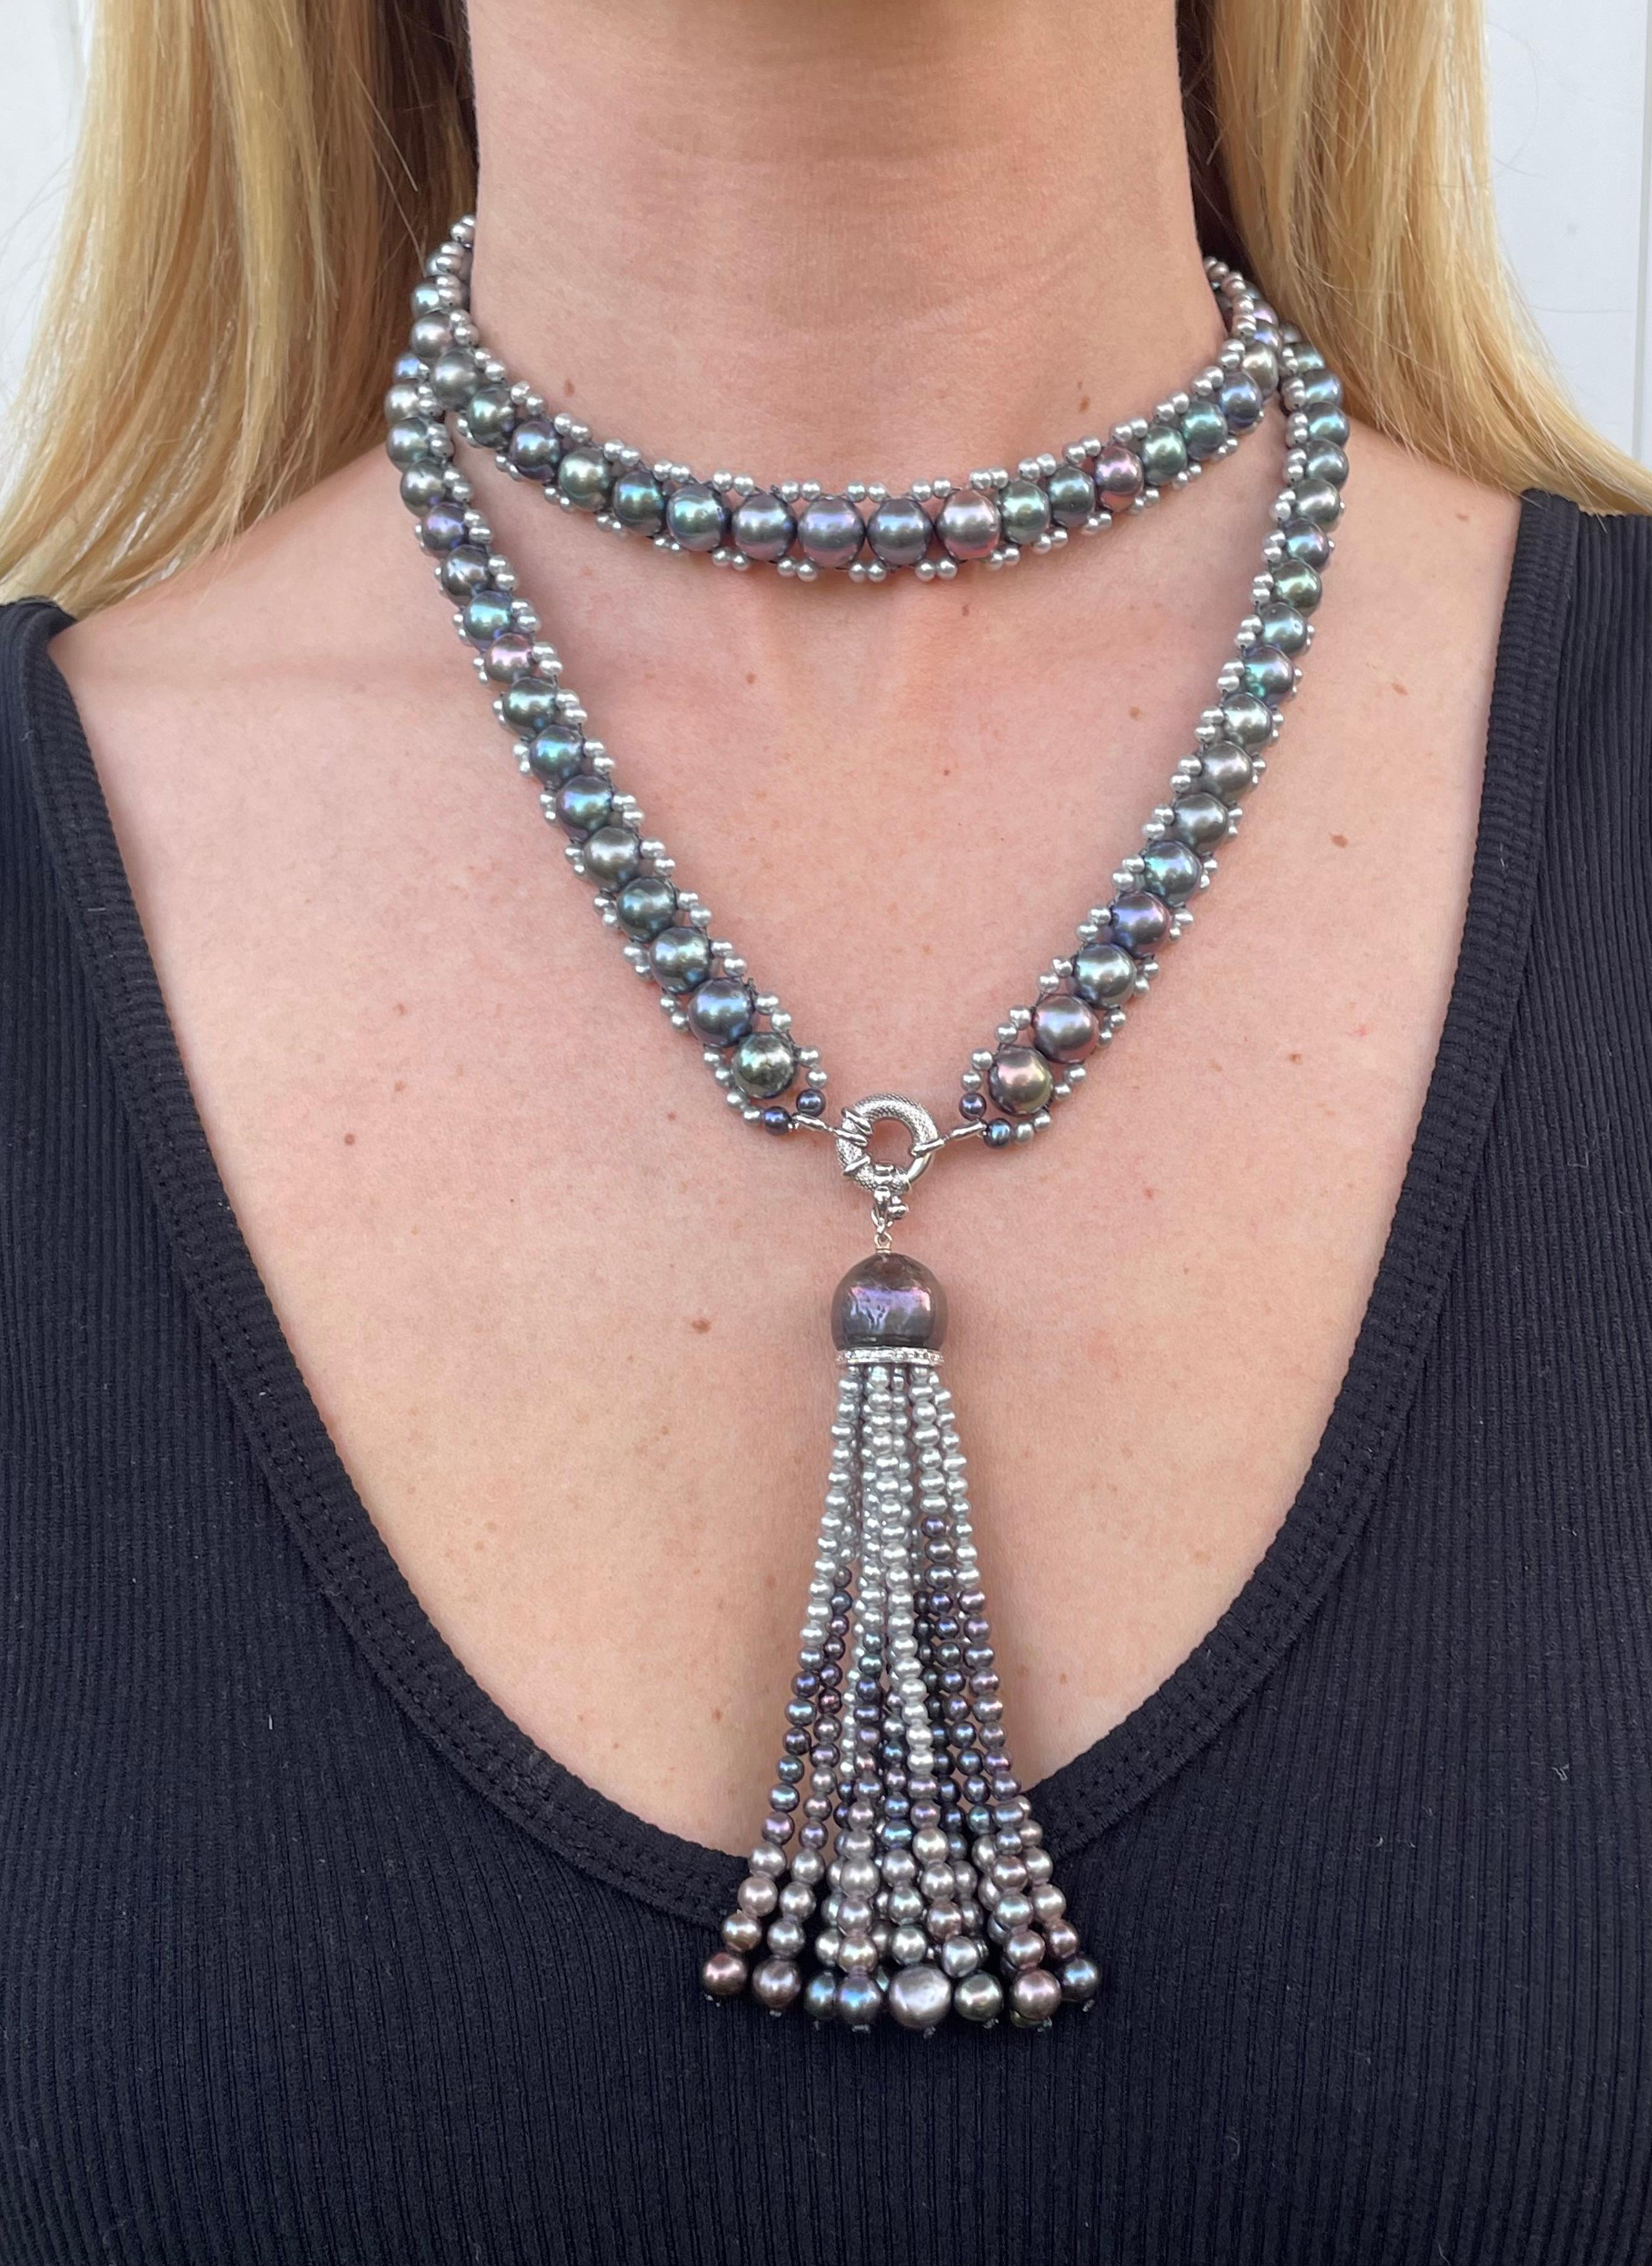 New take on a classic Marina J. piece. This closed Sautor is made with all Grey and Black Pearls strung together into a column like design. The Black Pearls on this piece radiate a magnificent multi color iridescent luster, giving an almost 